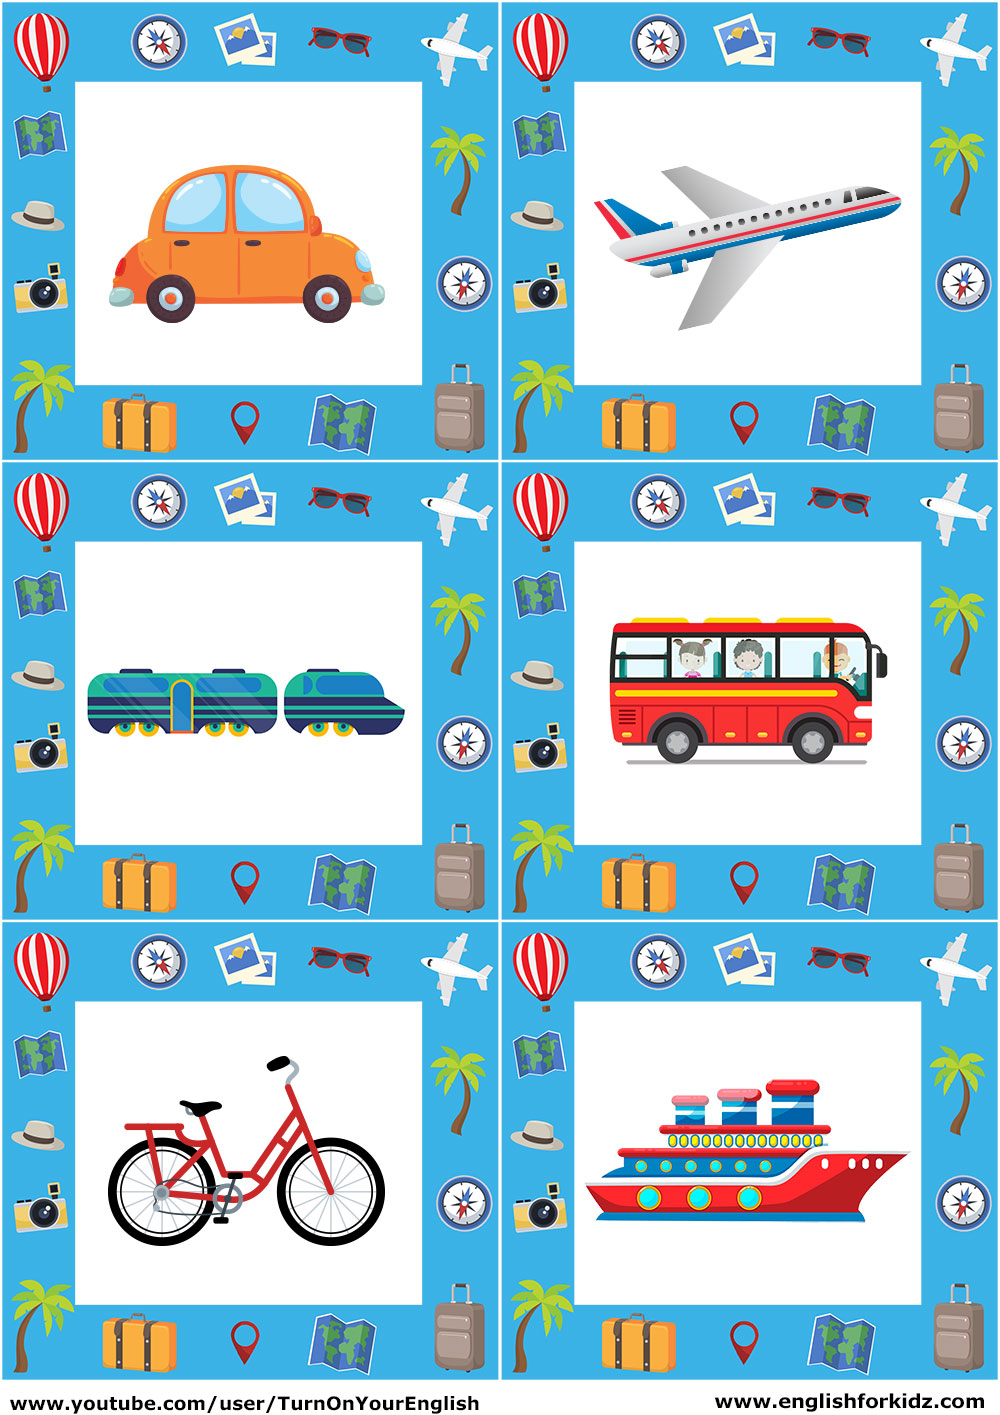 english-for-kids-step-by-step-transport-song-for-children